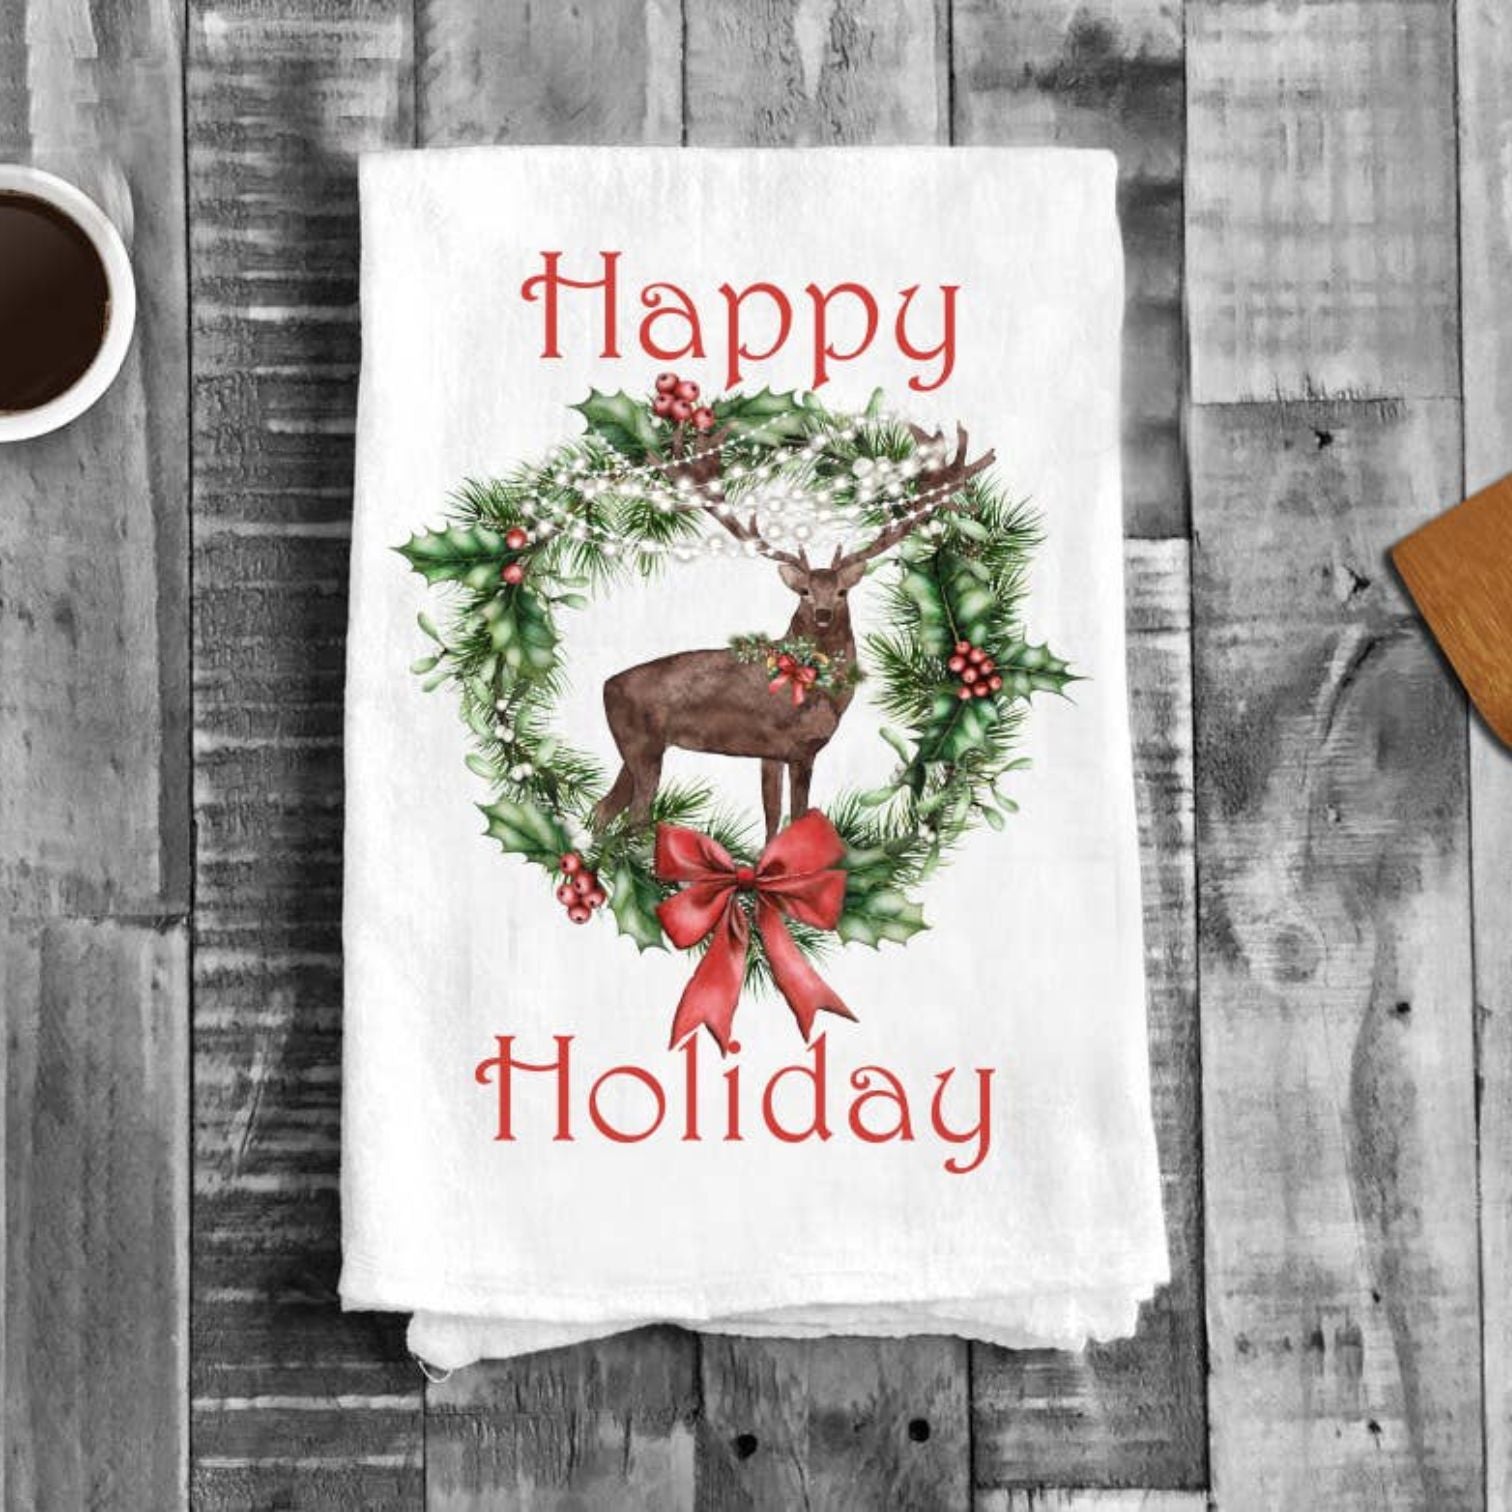 Rustic Country Christmas Holiday Cotton Tea Towel Kitchen